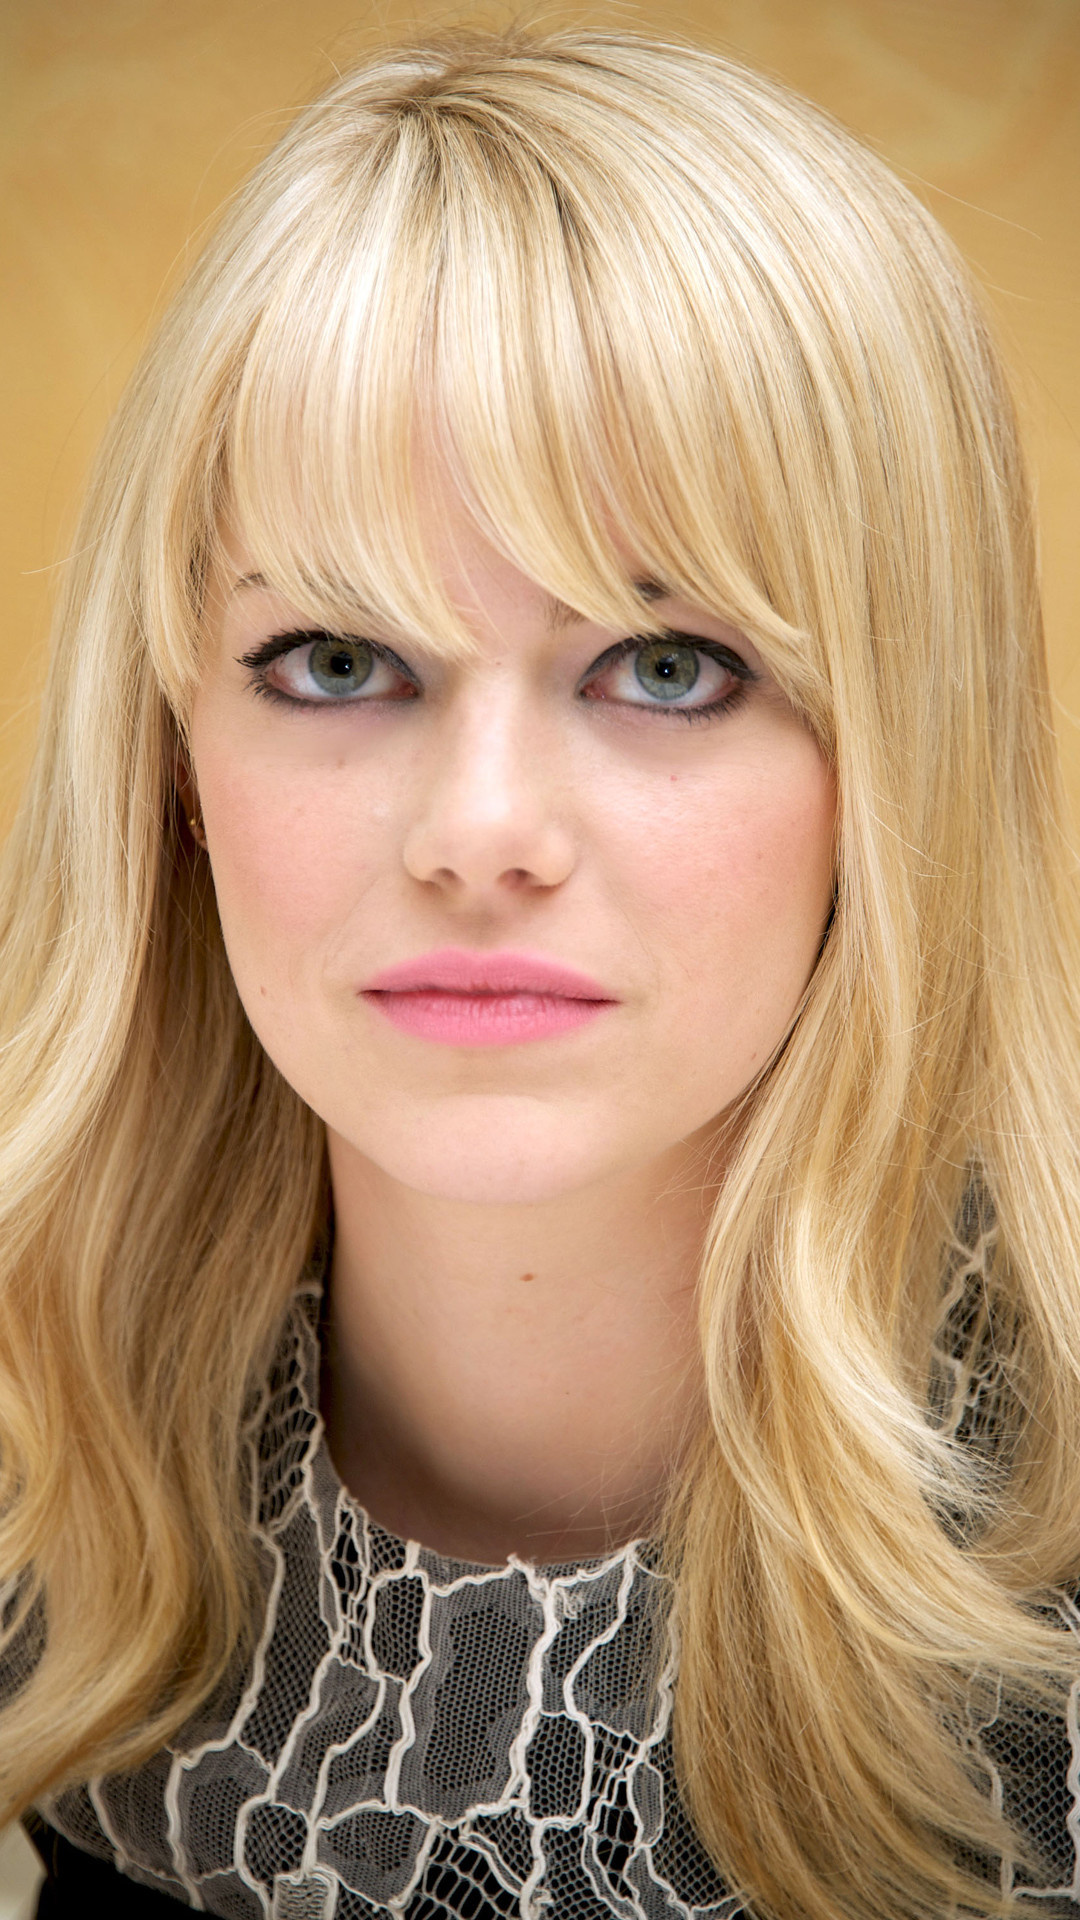 Emma Stone movies, Mobile wallpapers, High-resolution images, Celebrity charm, 1080x1920 Full HD Phone